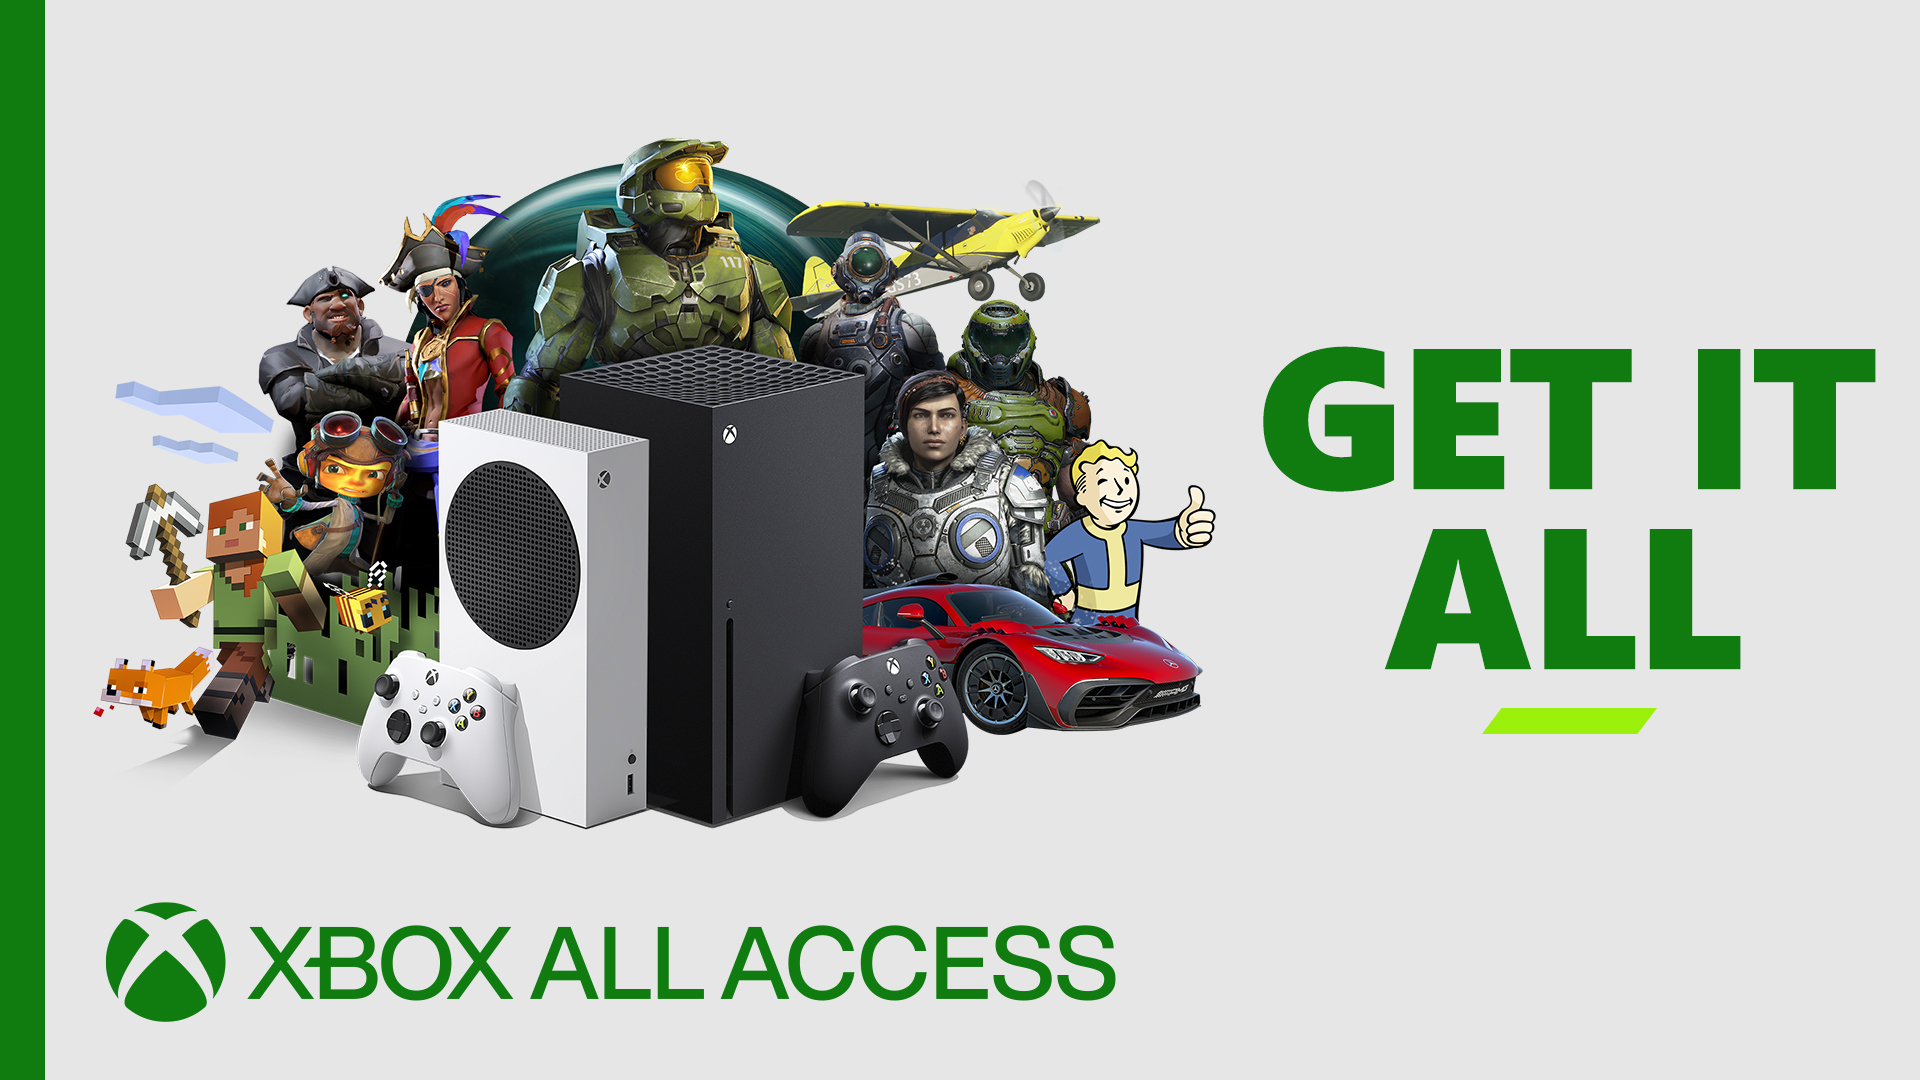 Xbox All Access will be available in Switzerland starting August 30 HERO